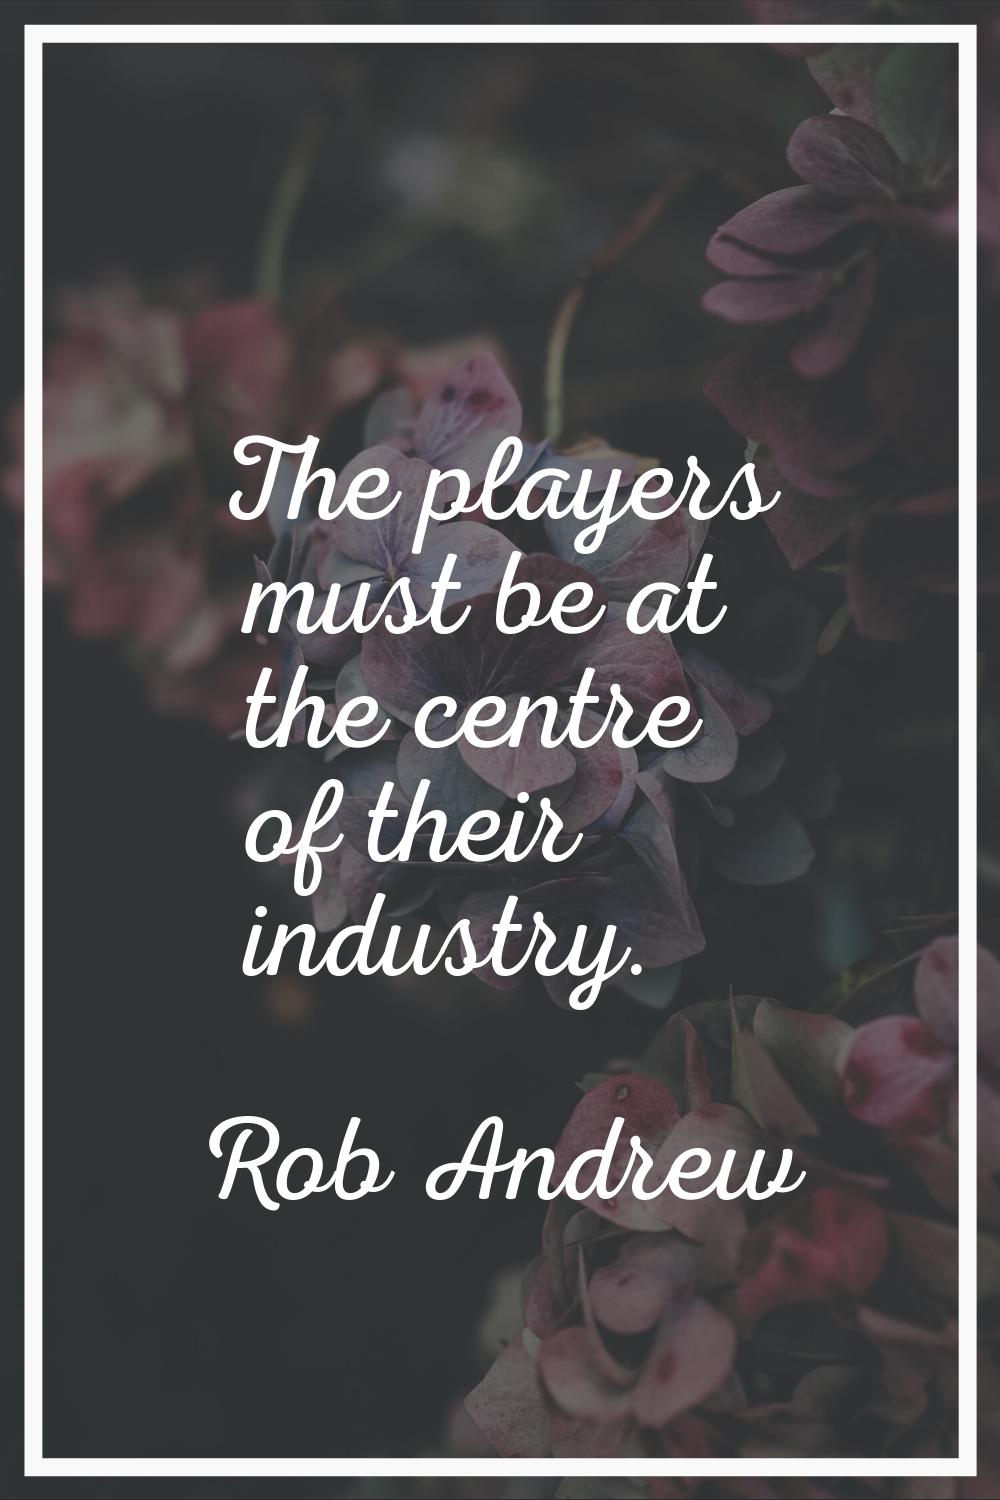 The players must be at the centre of their industry.